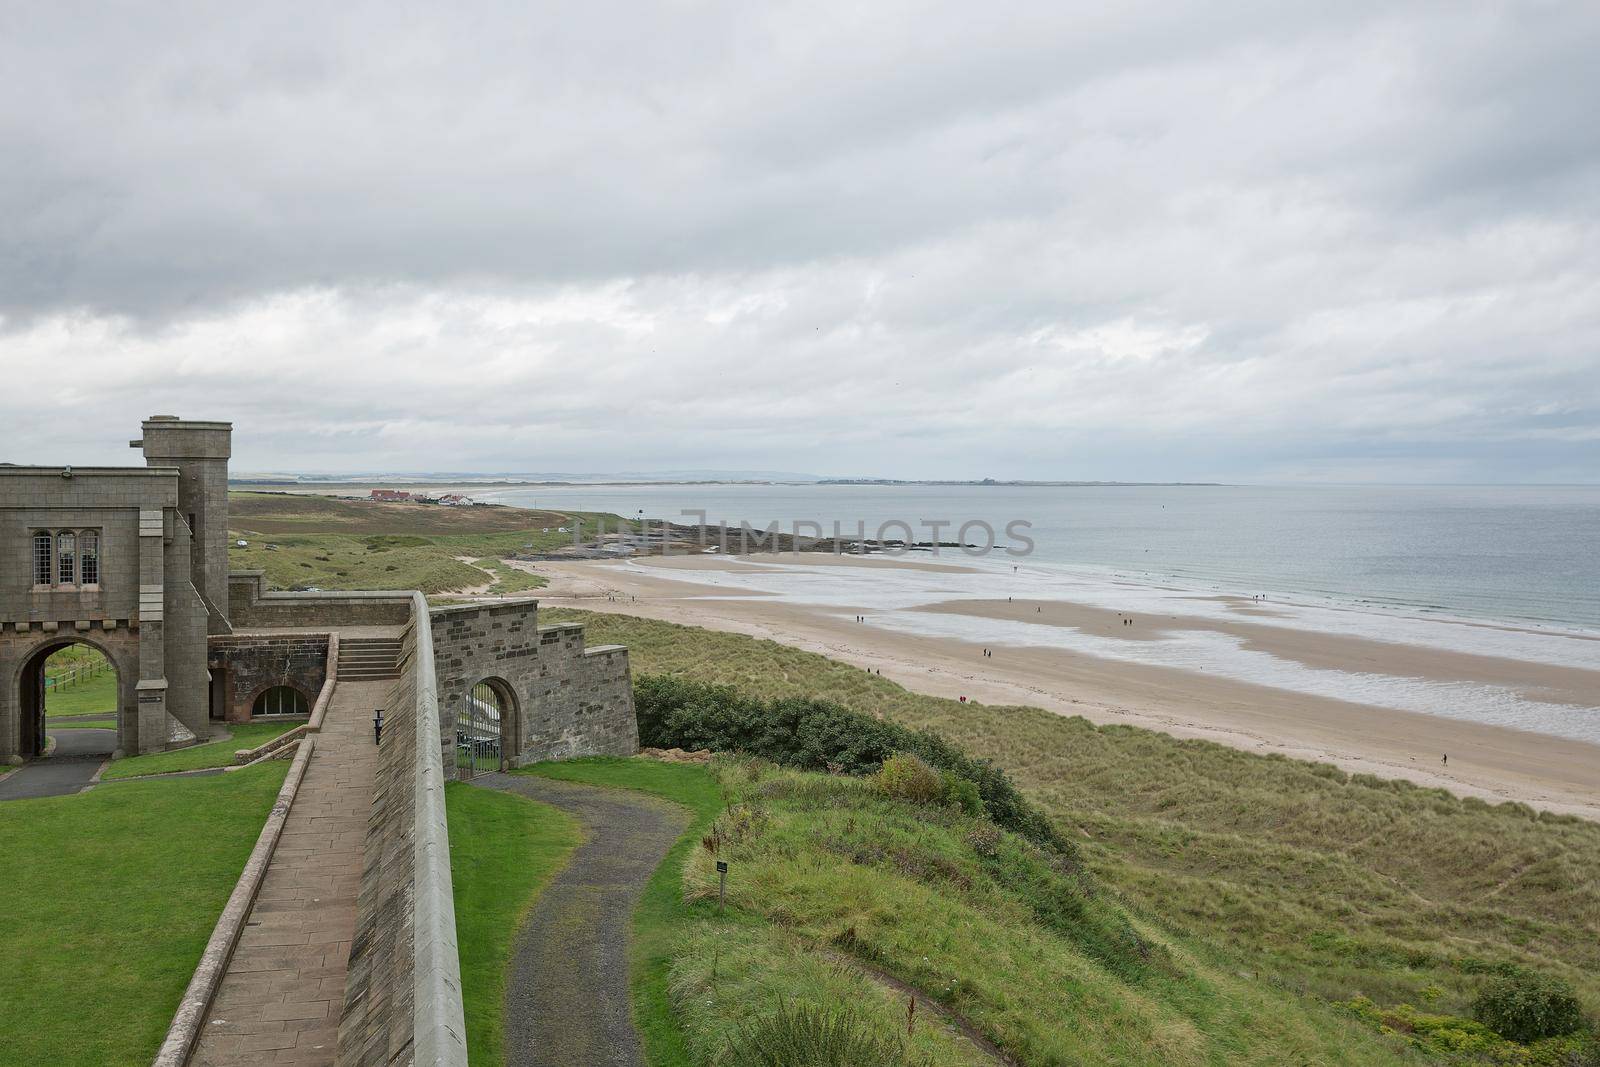 BAMBURGH, NORTHUMBERLAND, ENGLAND, UK - SEPTEMBER 10, 2017: View of a beach from Bamburgh Castle in Northumberland, England, UK.